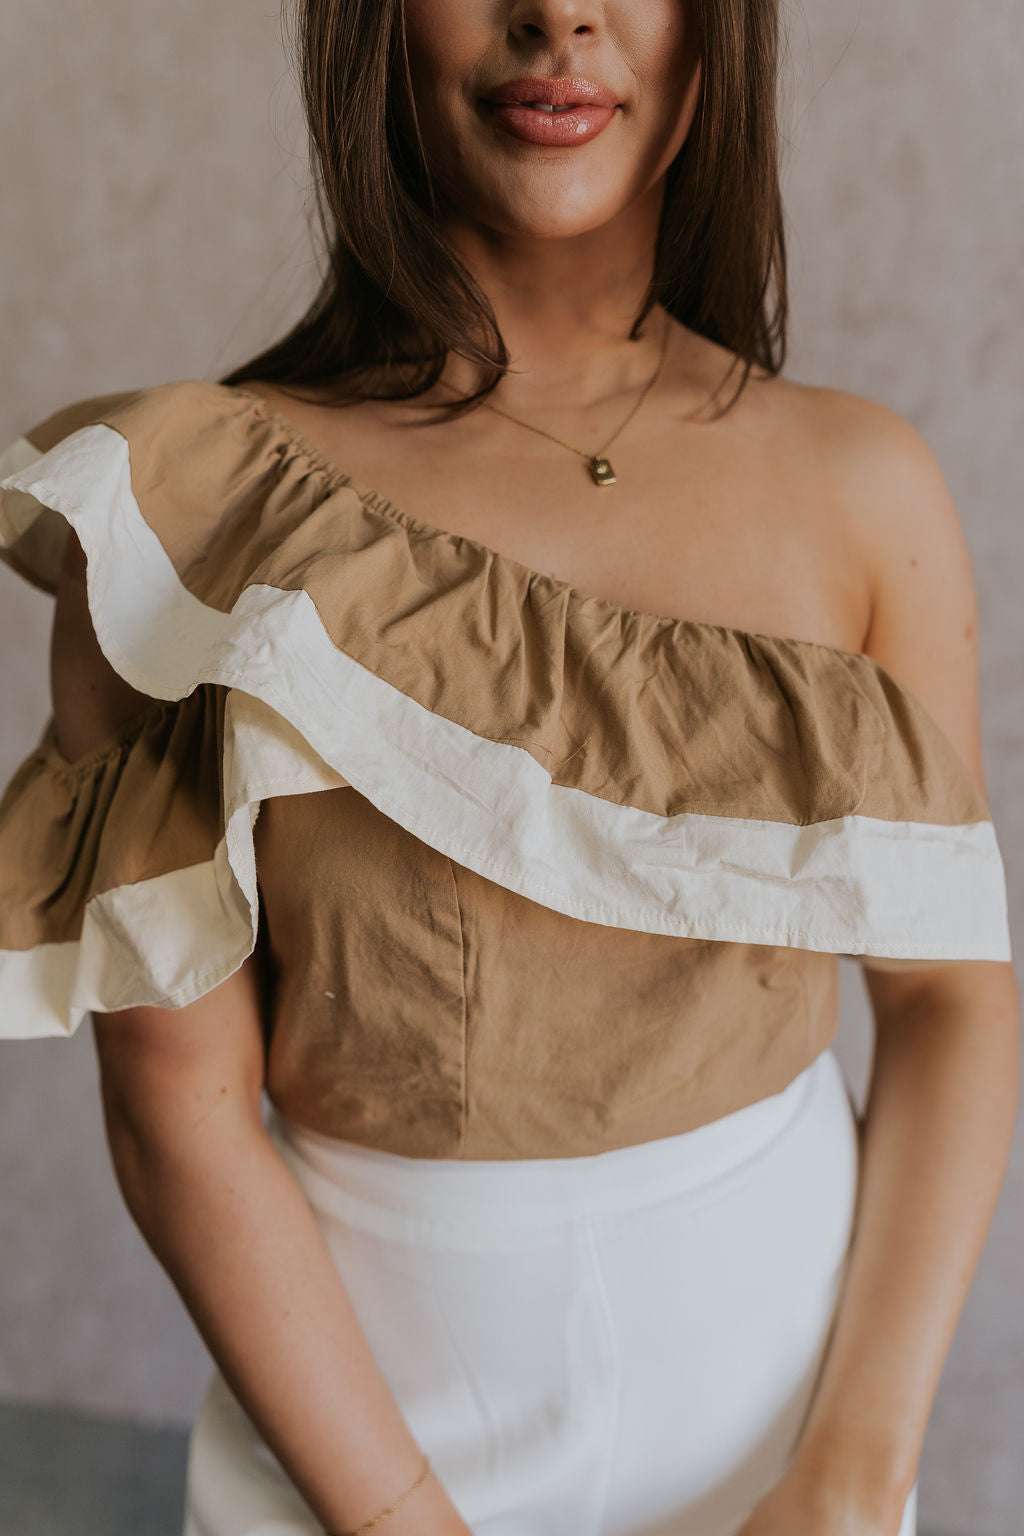 Close up view of female model wearing the Rosalie Khaki & Cream Ruffle One-Shoulder Top which features Brown and Cream Lightweight Fabric, Cropped Waist, Side Zipper with Hook Closure, One-Shoulder Ruffle Strap and Sleeveless